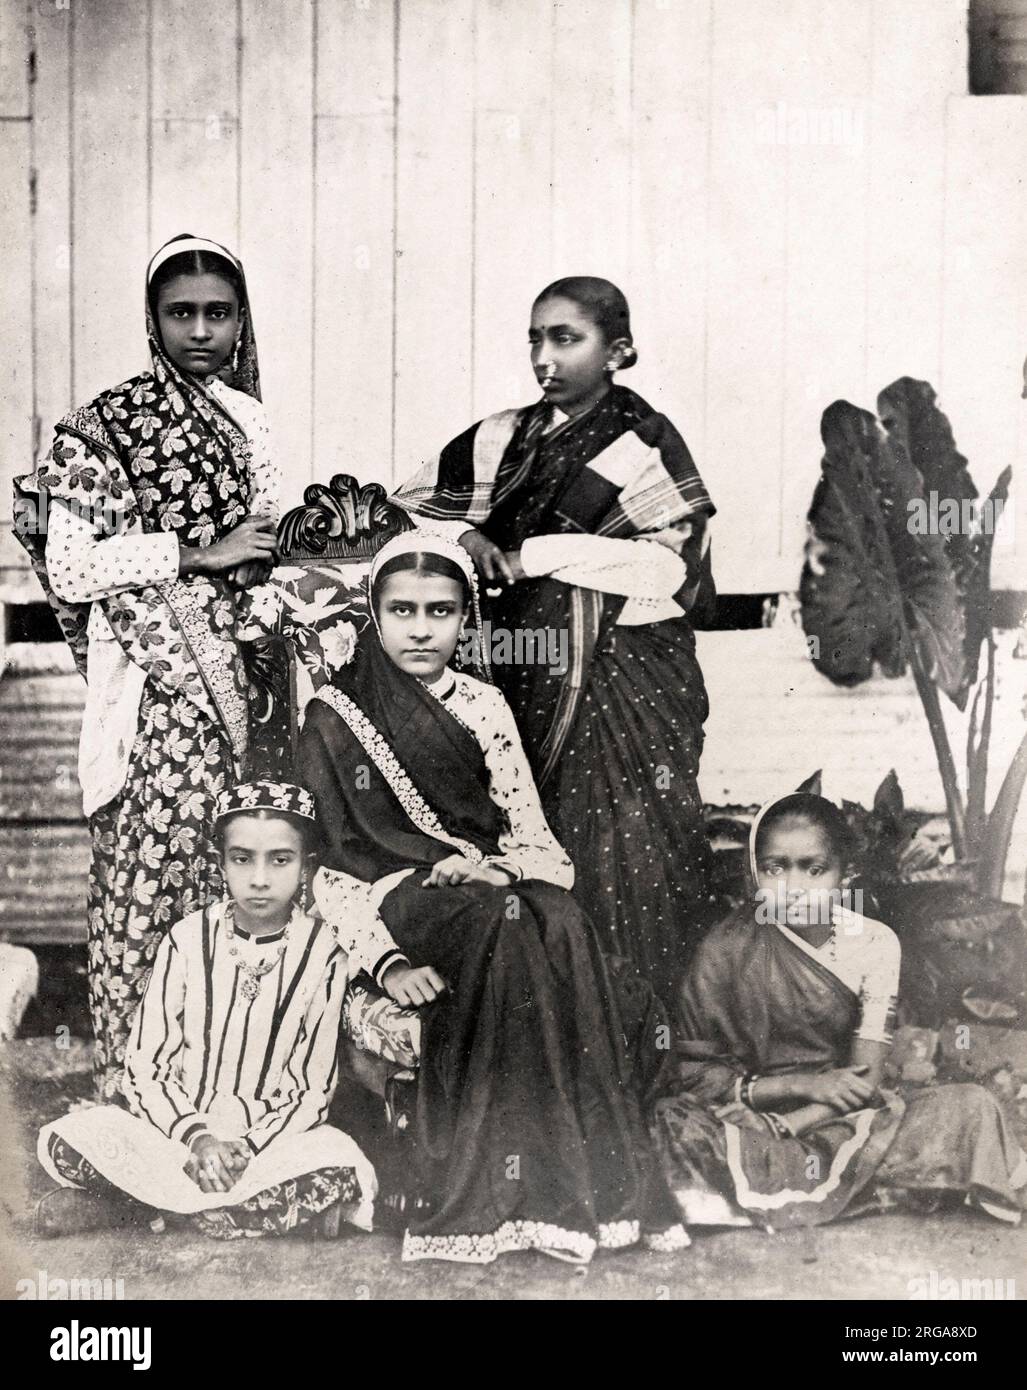 19th century vintage photograph: Parsee or Parsi women, India Stock Photo